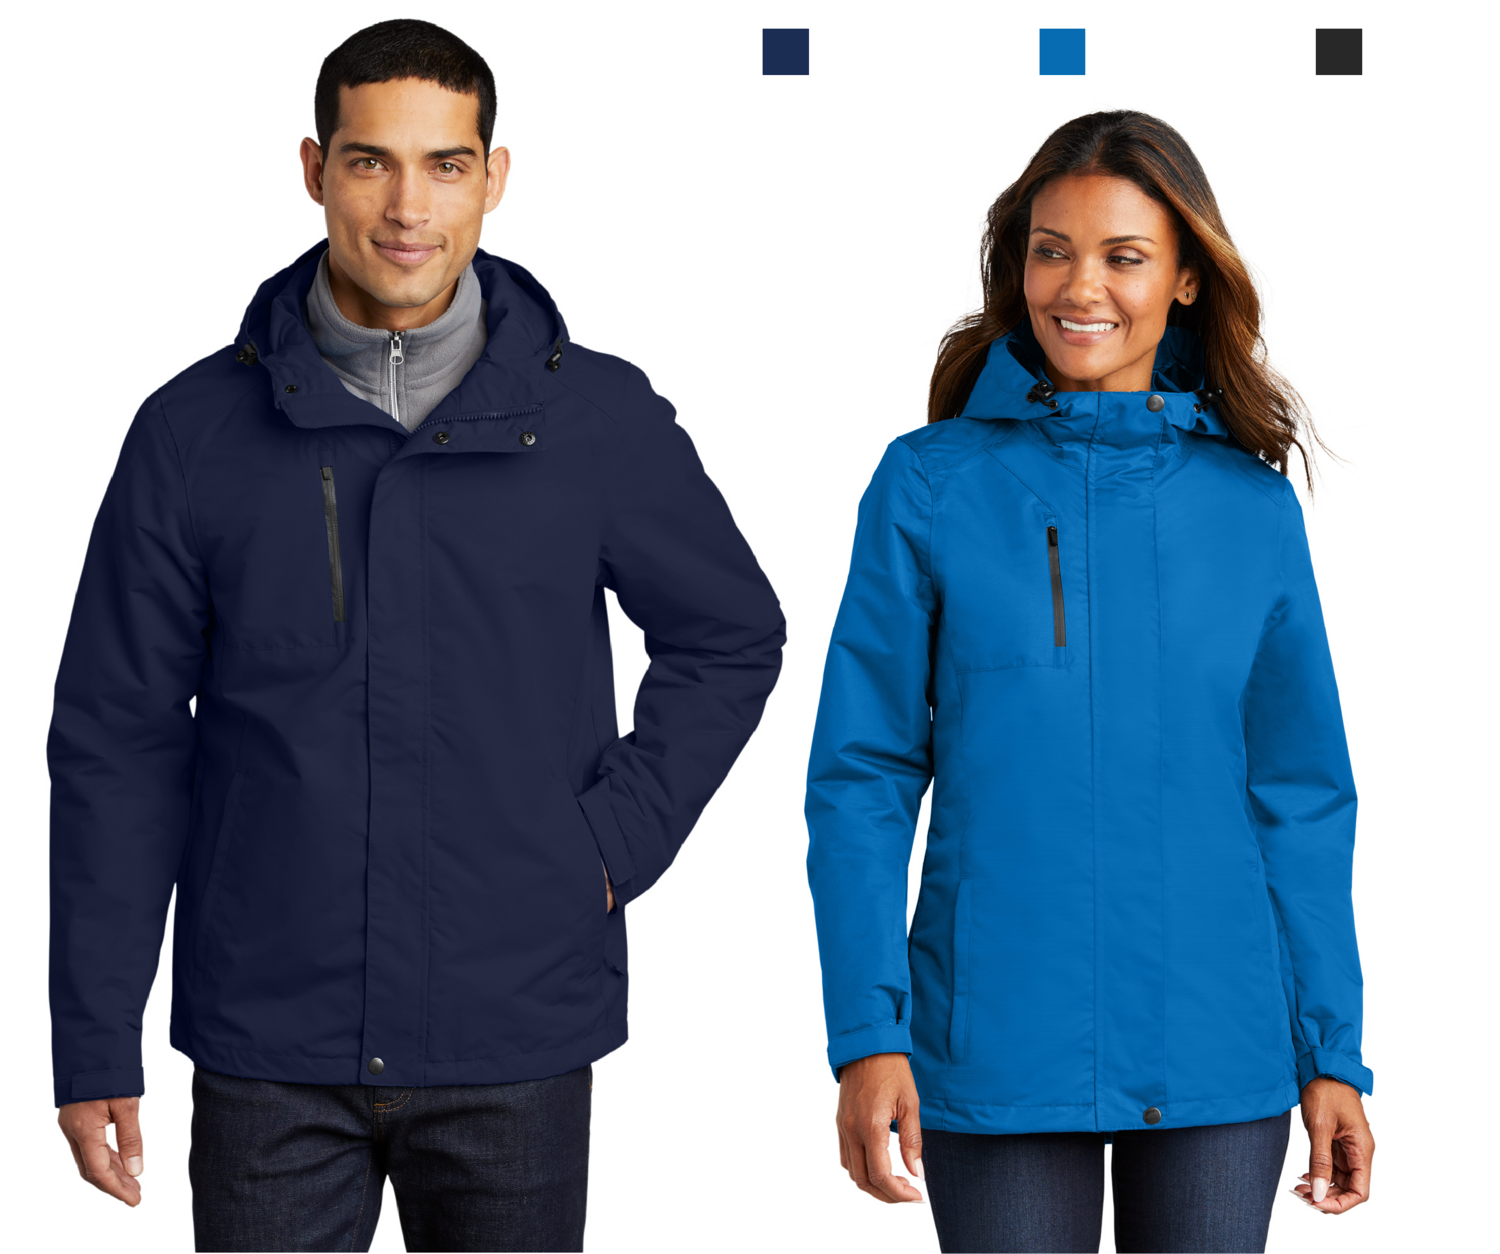 Port Authority All-Conditions Jacket - Men's and Ladies